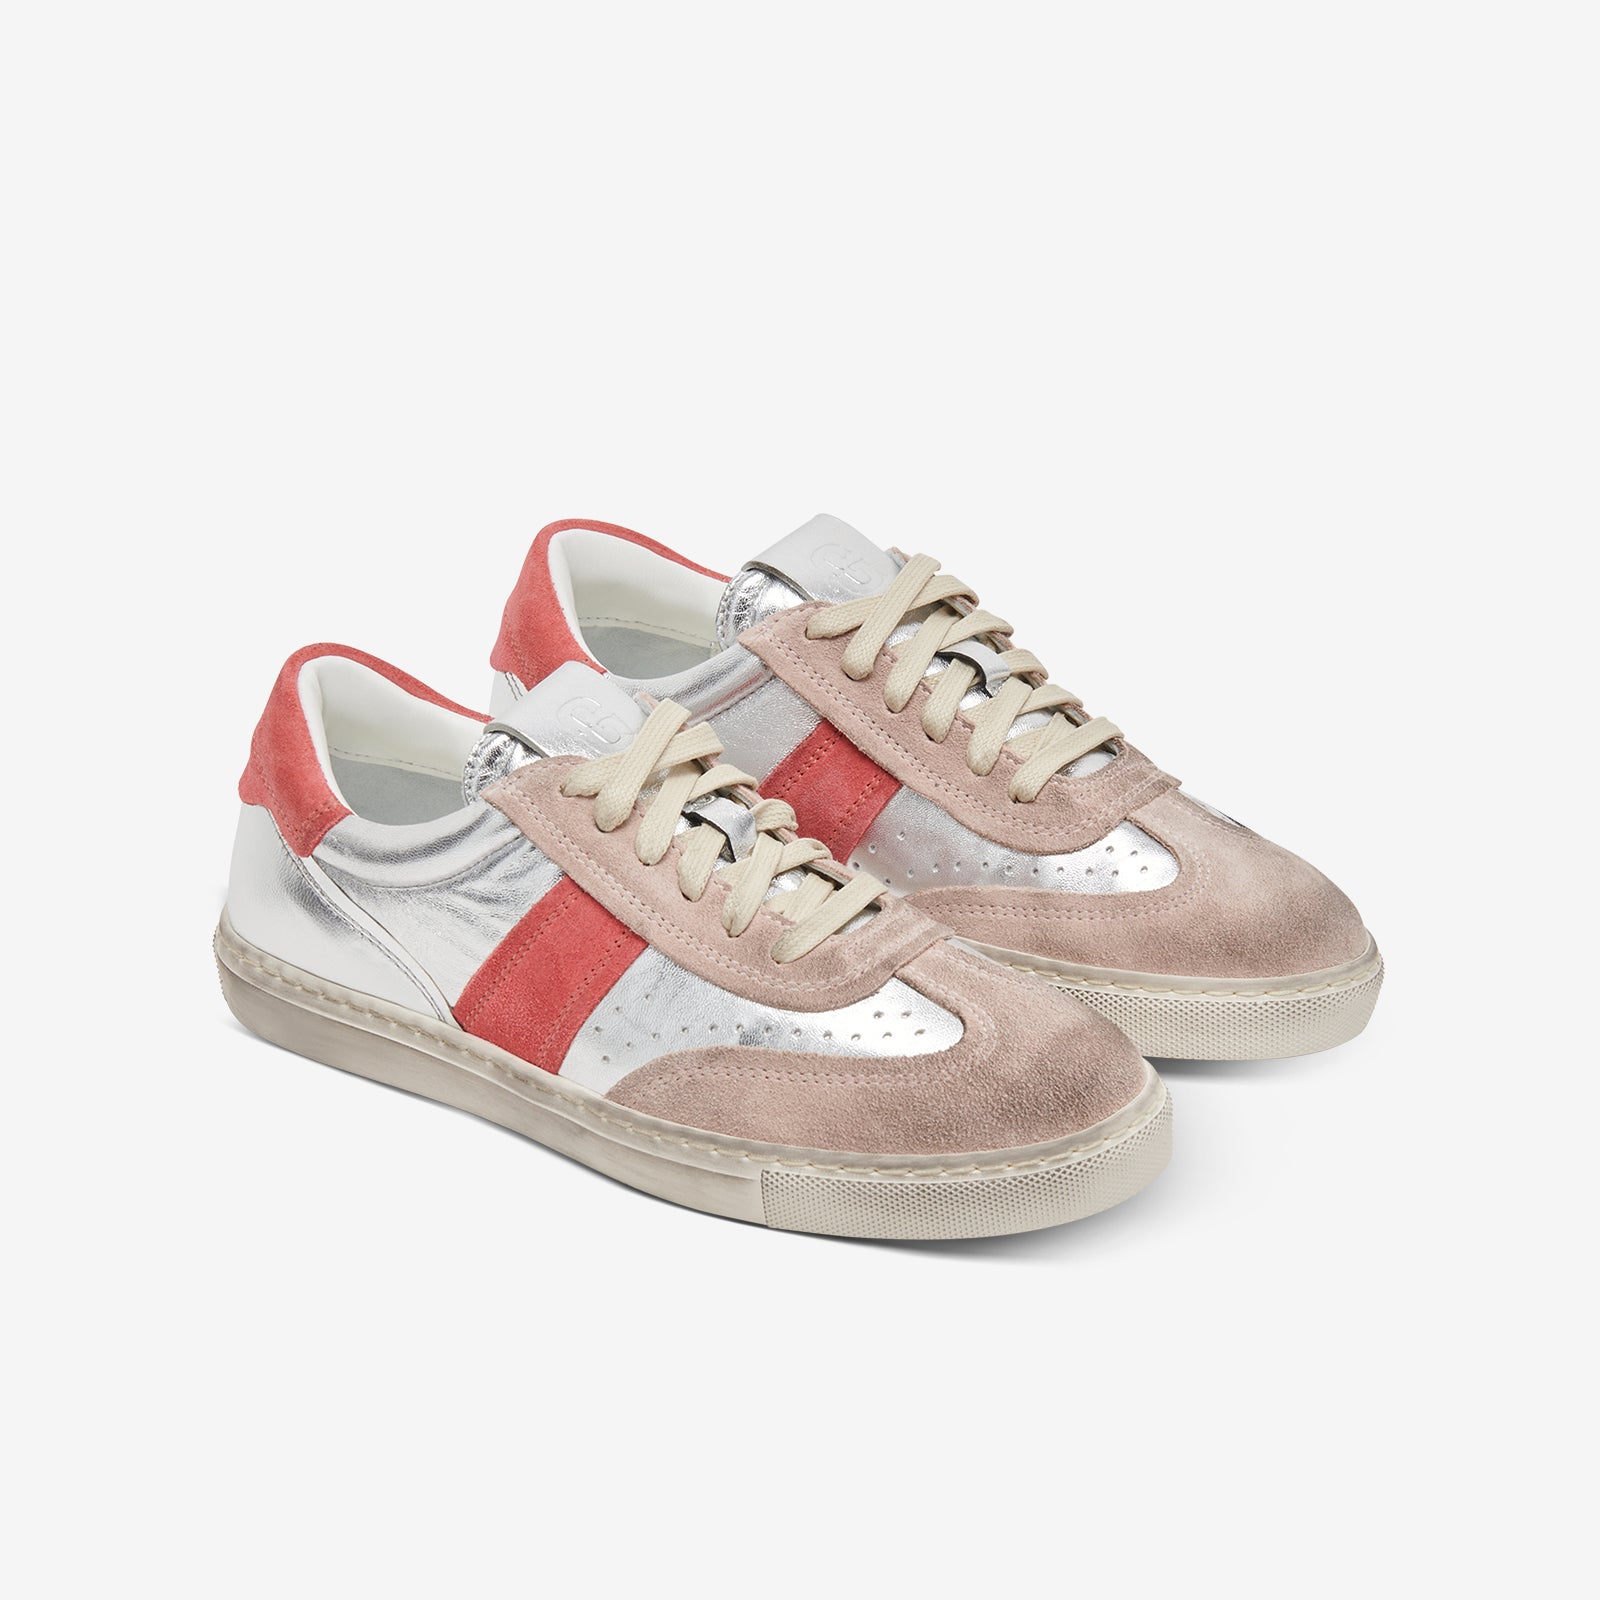 Greats - The Charlie Distressed - Blush Multi - Women's Shoe – GREATS